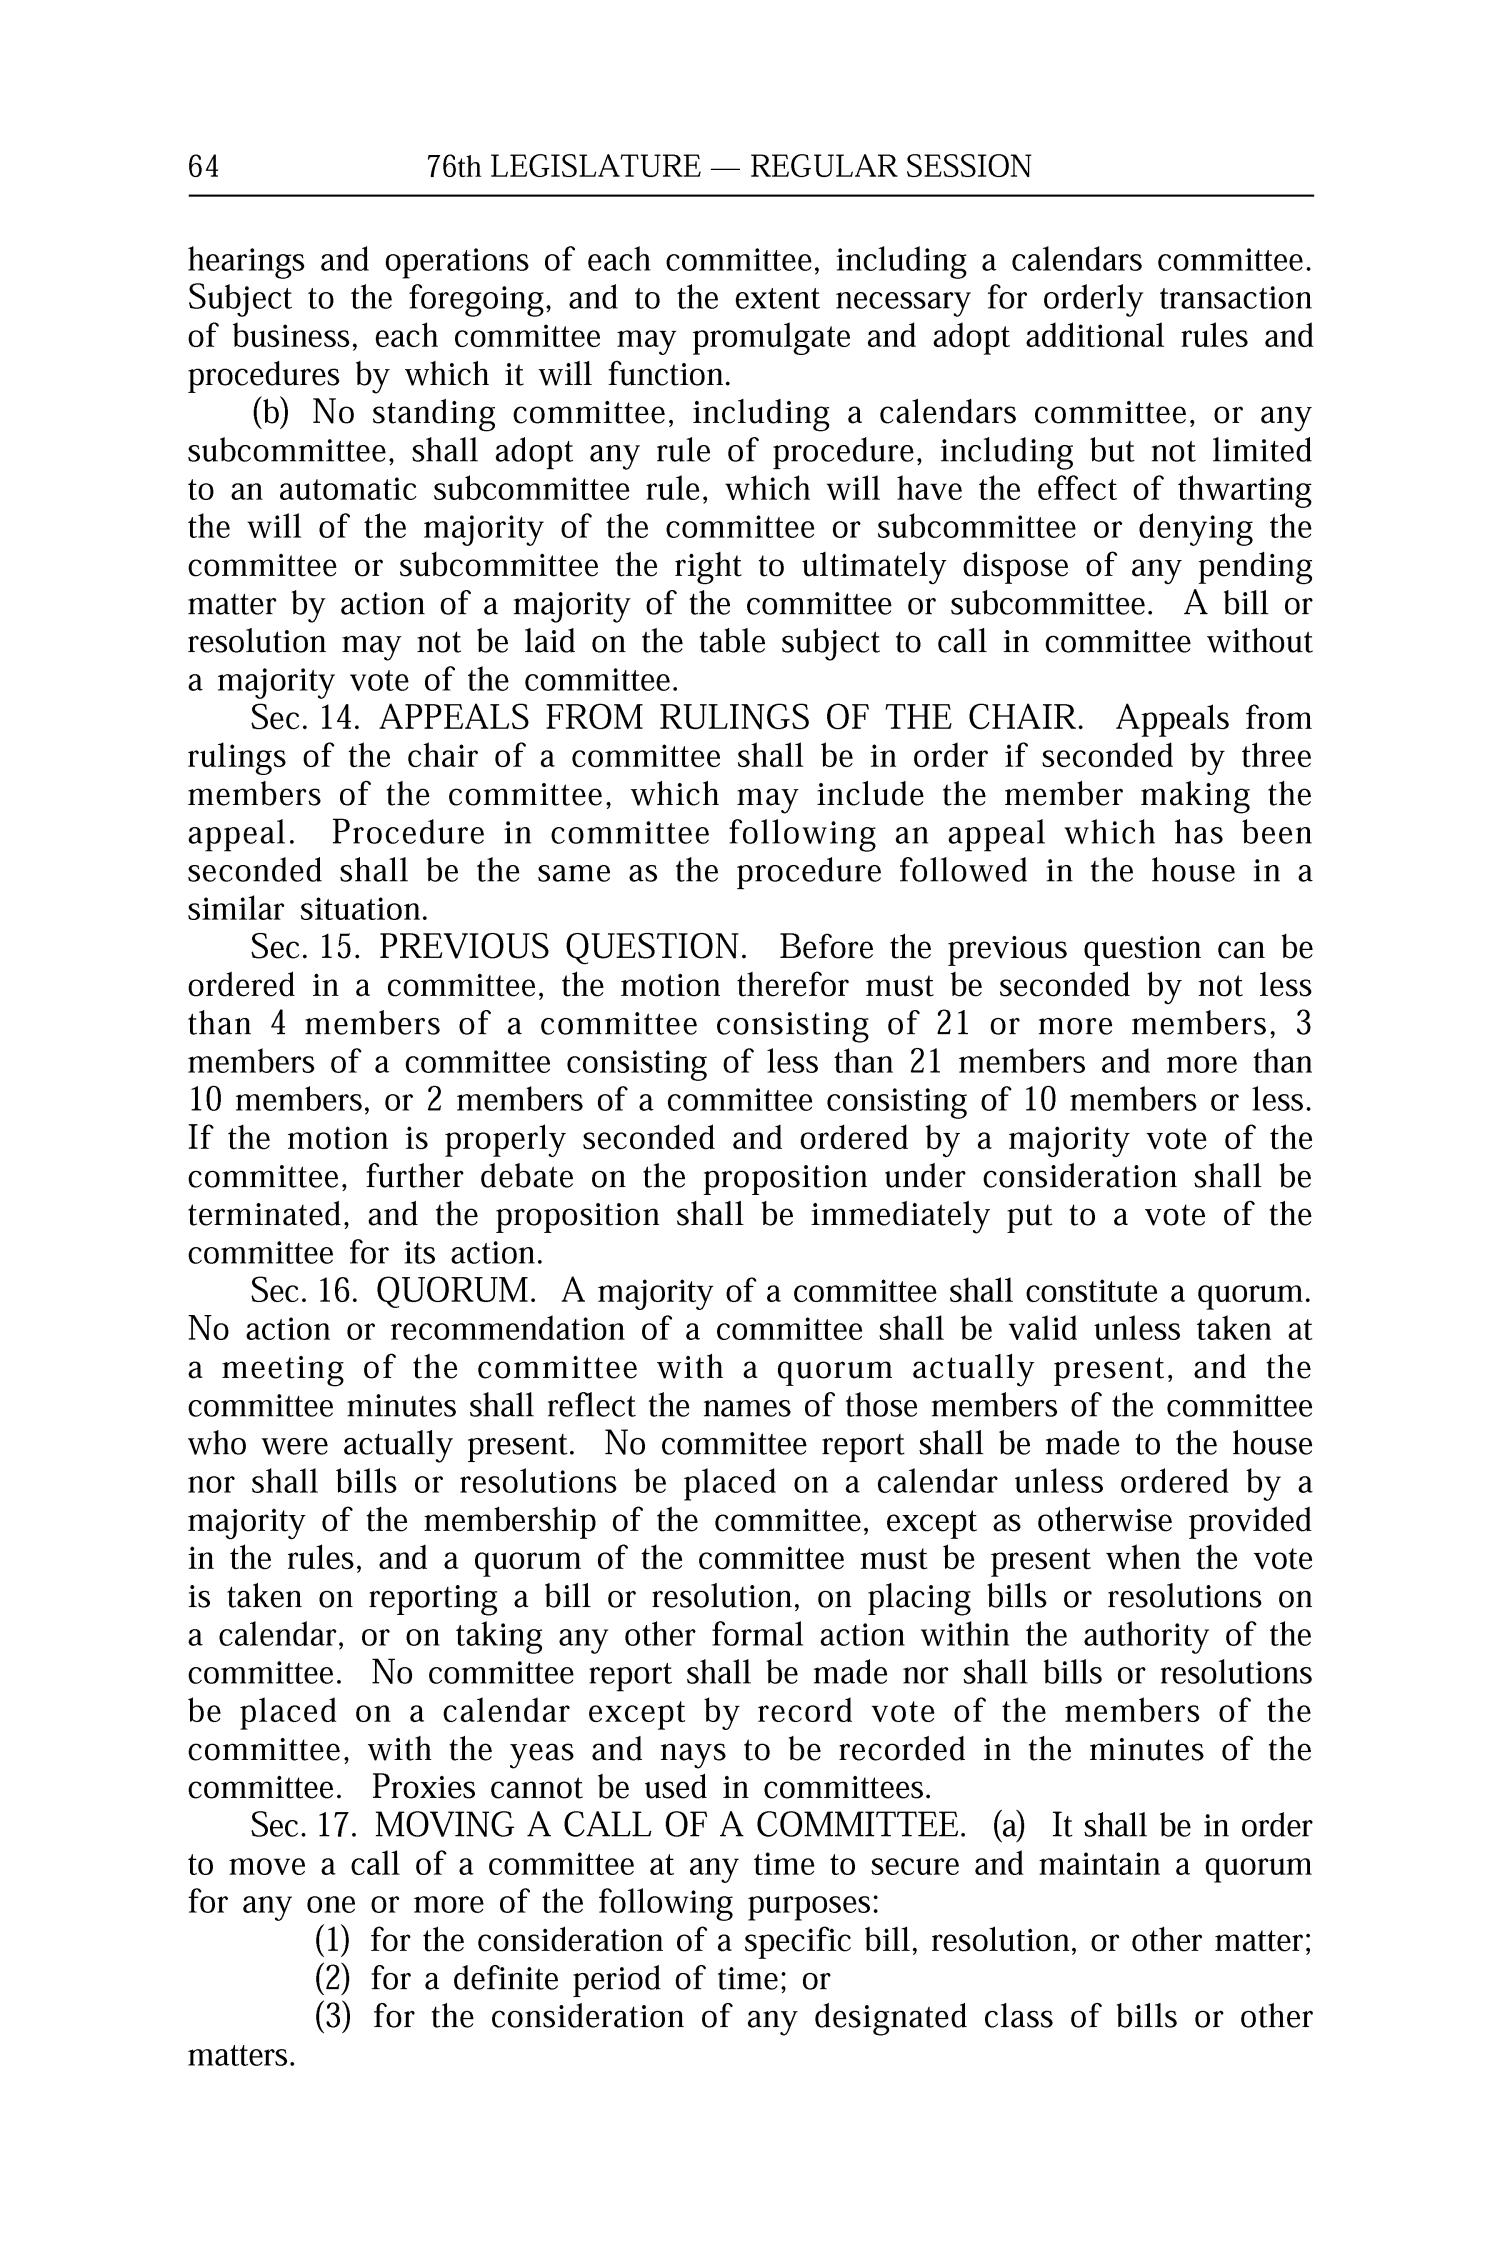 Journal of the House of Representatives of the Regular Session of the Seventy-Sixth Legislature of the State of Texas, Volume 1
                                                
                                                    64
                                                